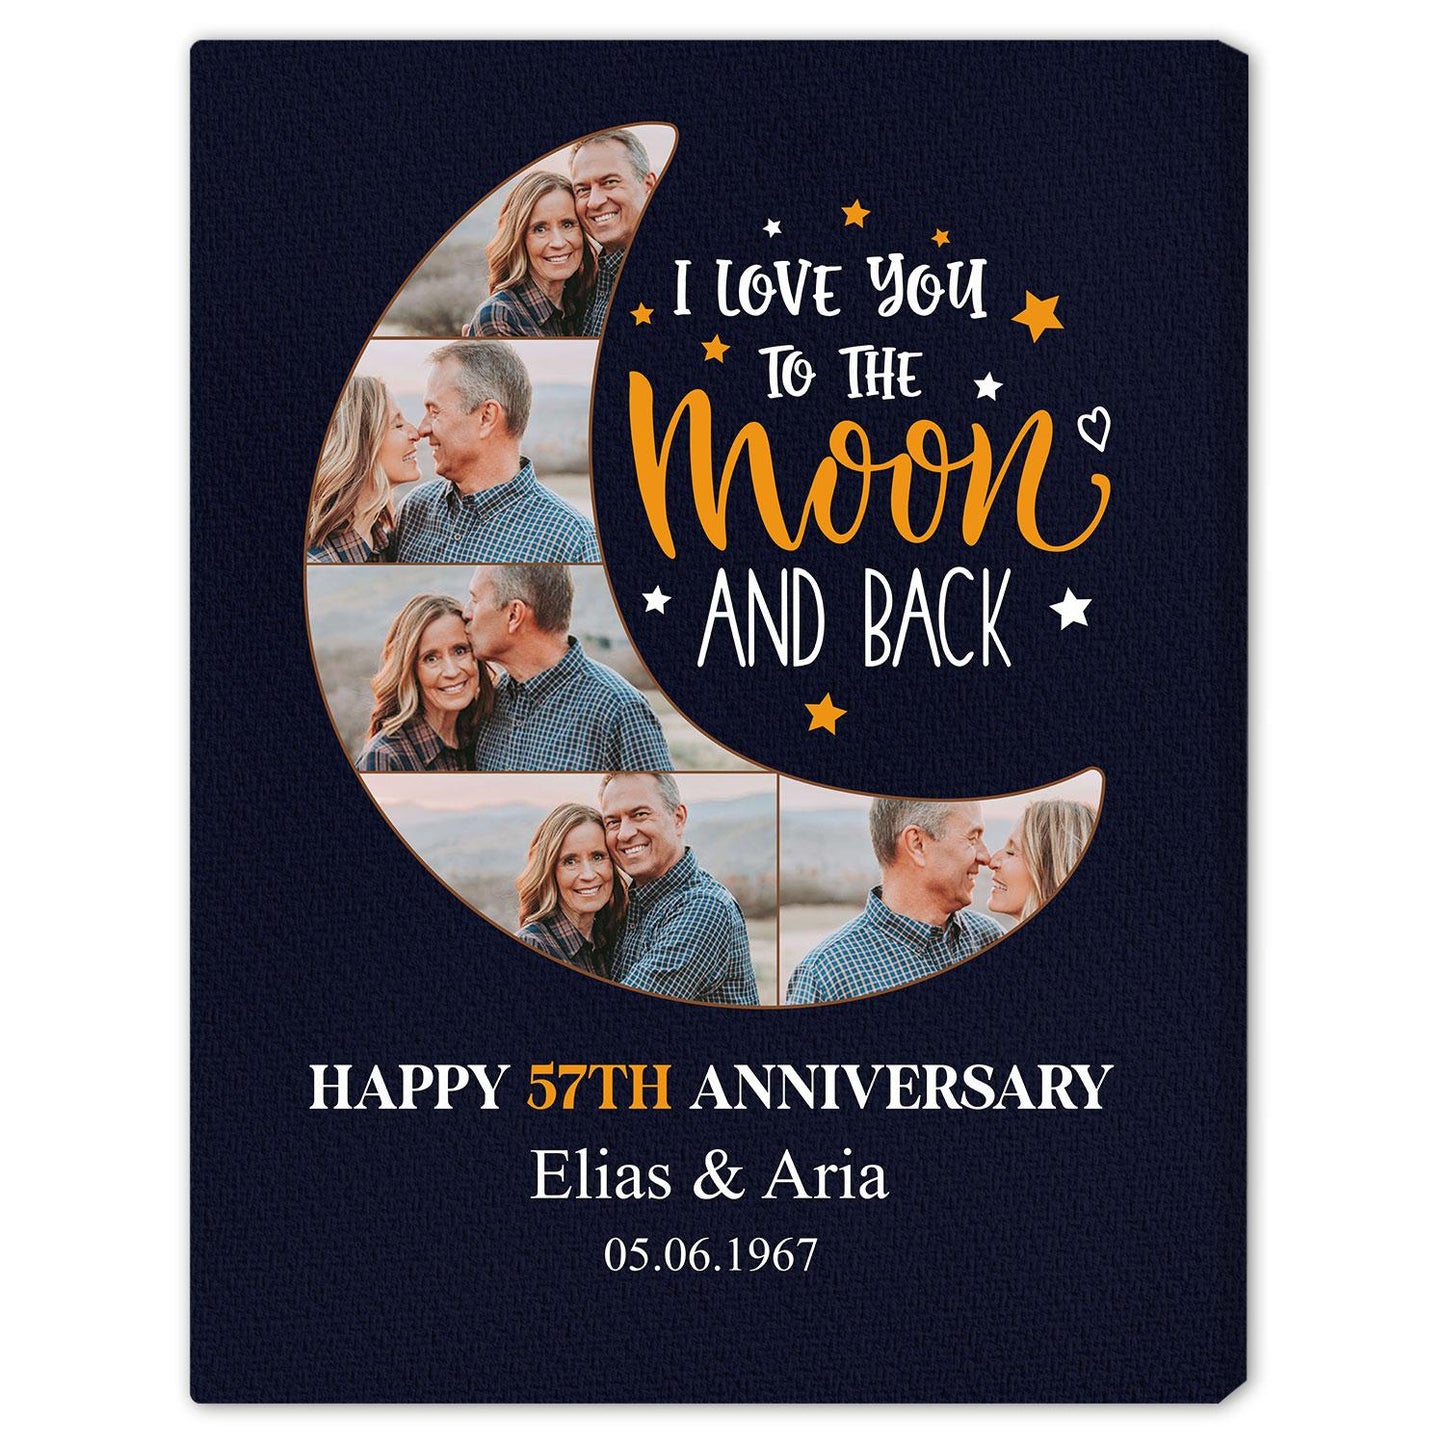 I Love You To The Moon And Back - Personalized 57 Year Anniversary gift For Husband or Wife - Custom Canvas Print - MyMindfulGifts